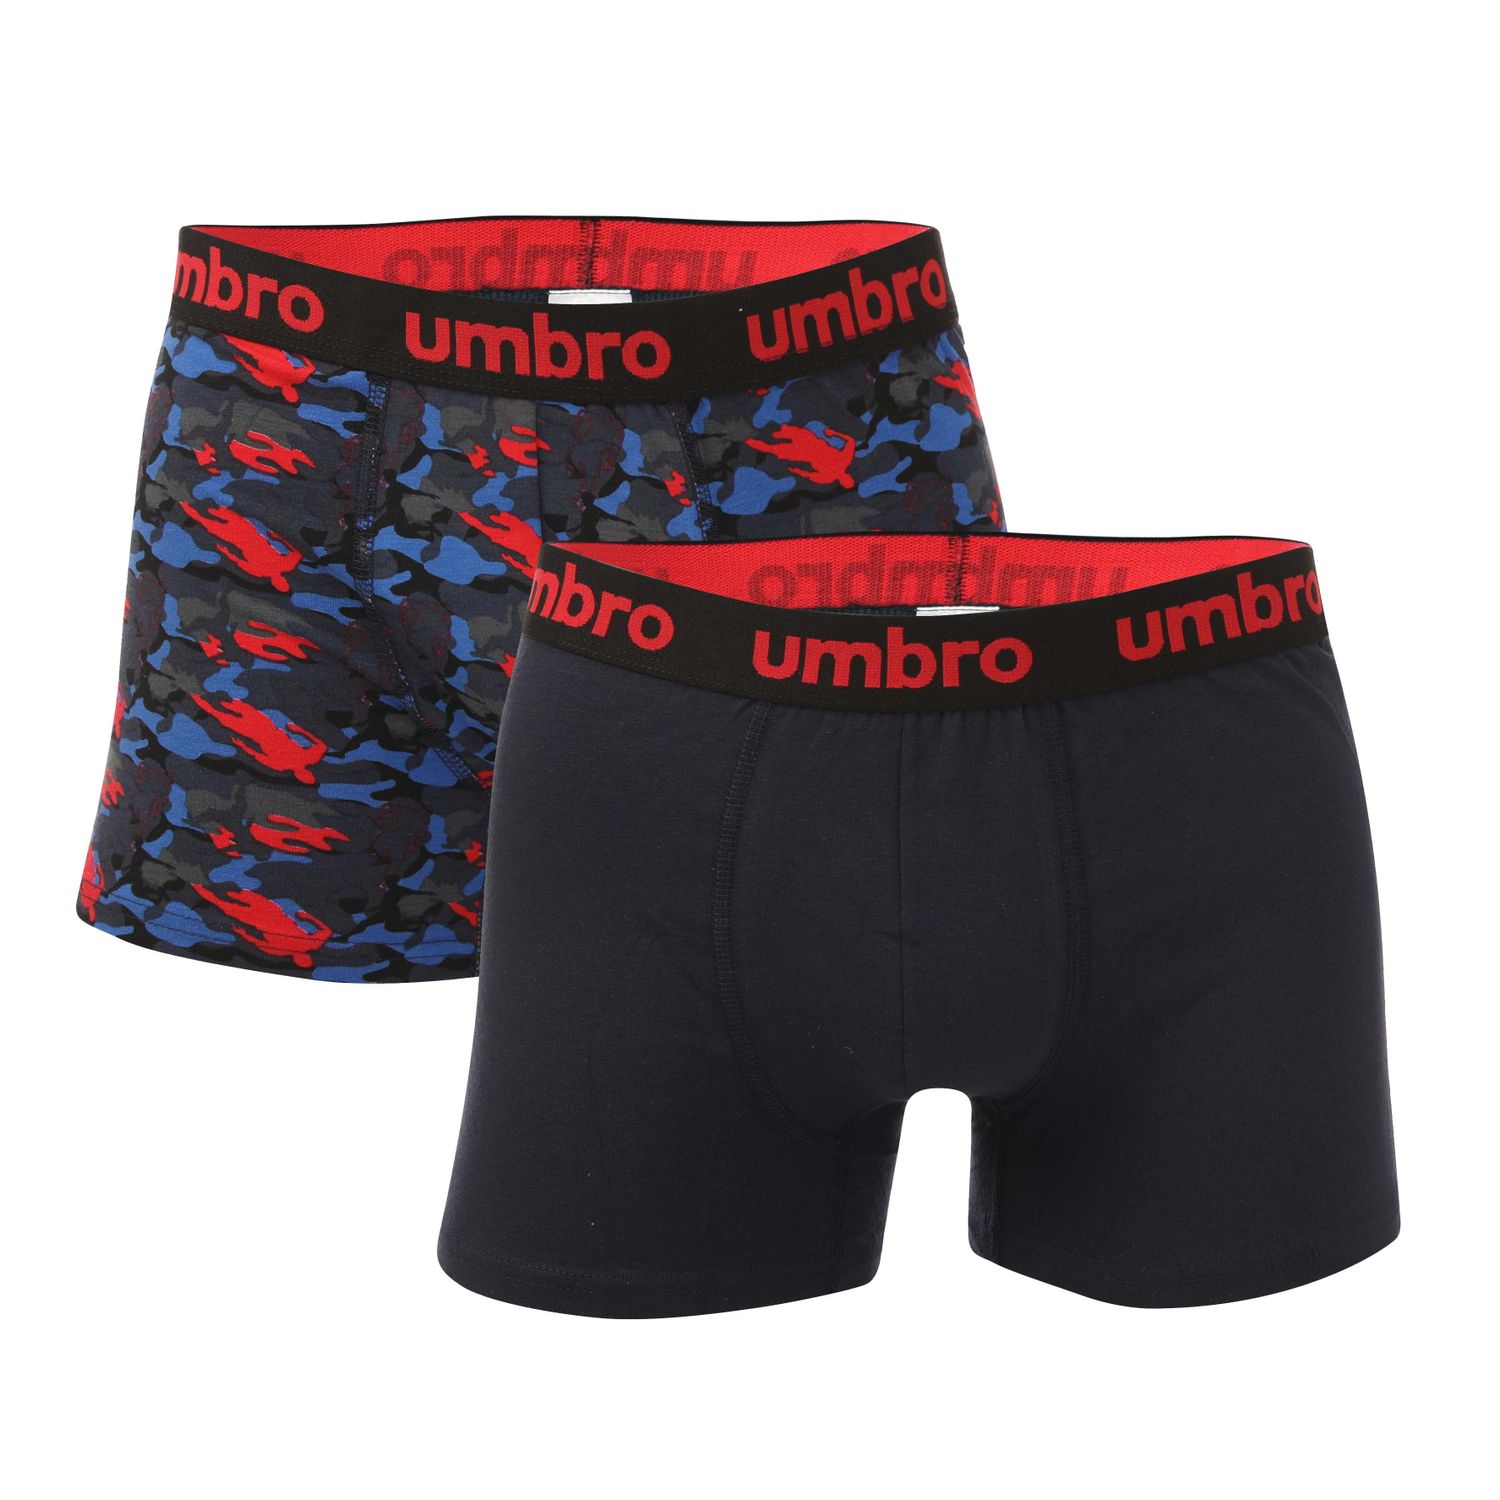 Red Umbro Mens 2 Pack Boxers - Get The Label